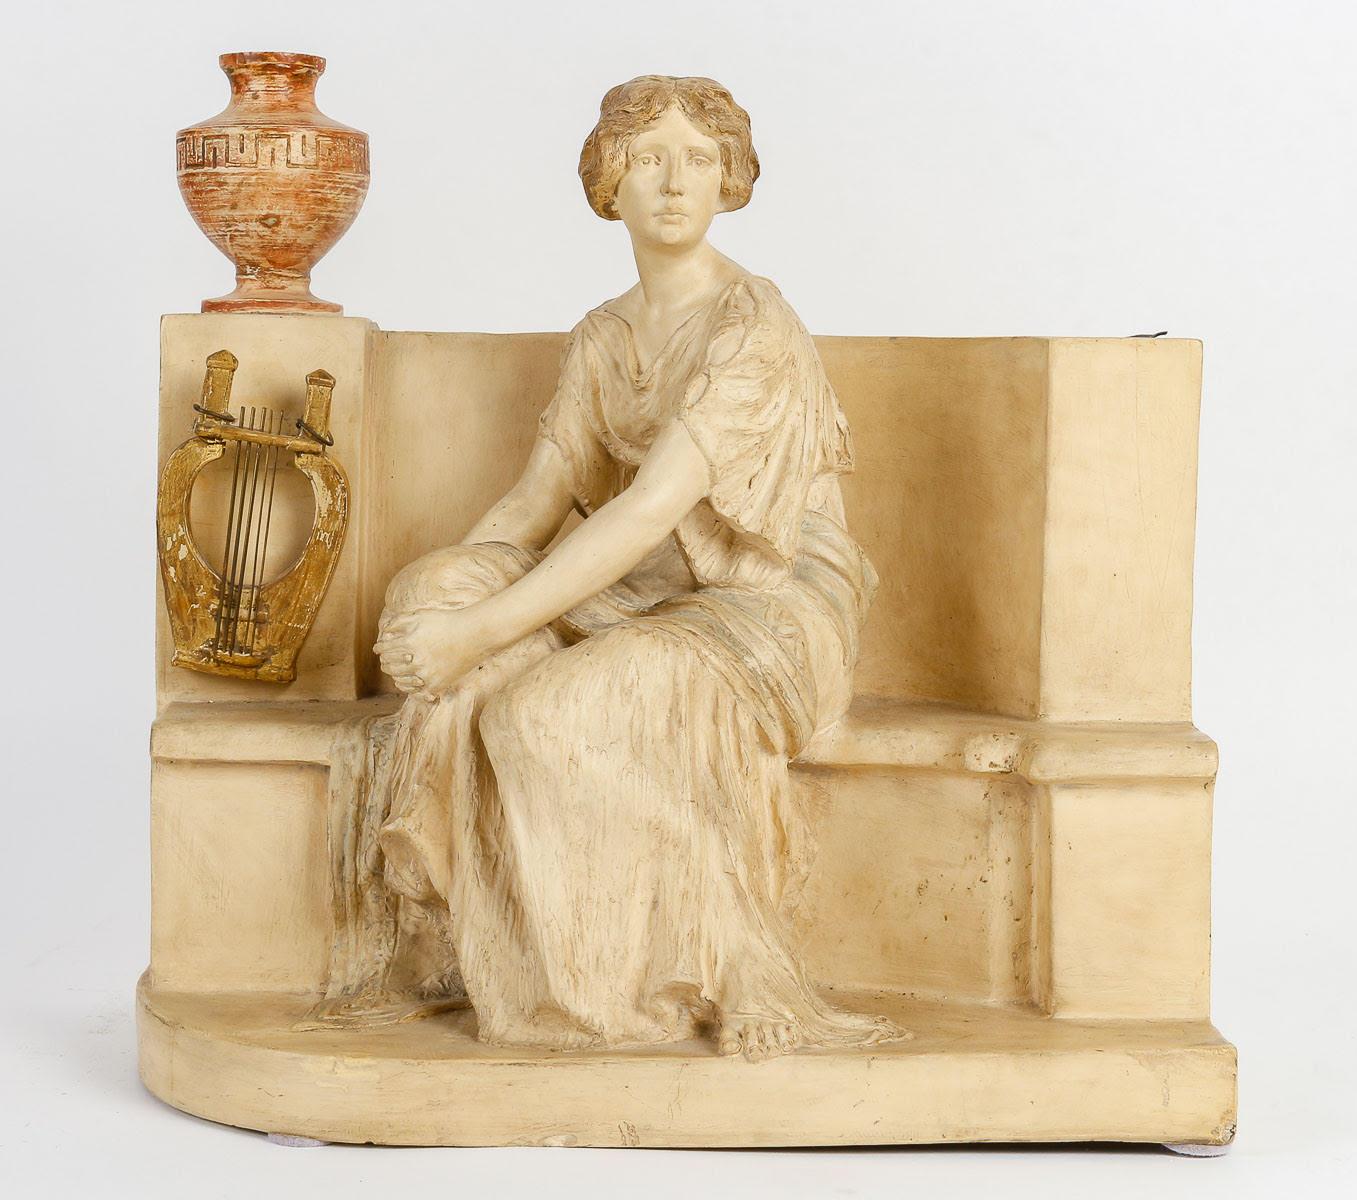 Terracotta planter by Montovany, Art Nouveau.

Terracotta planter by Montovany, Art Nouveau, 1910, restoration to the jug, broken and recoloured, inside of the tub in zinc.  
h: 38cm , w: 40cm, d: 22cm